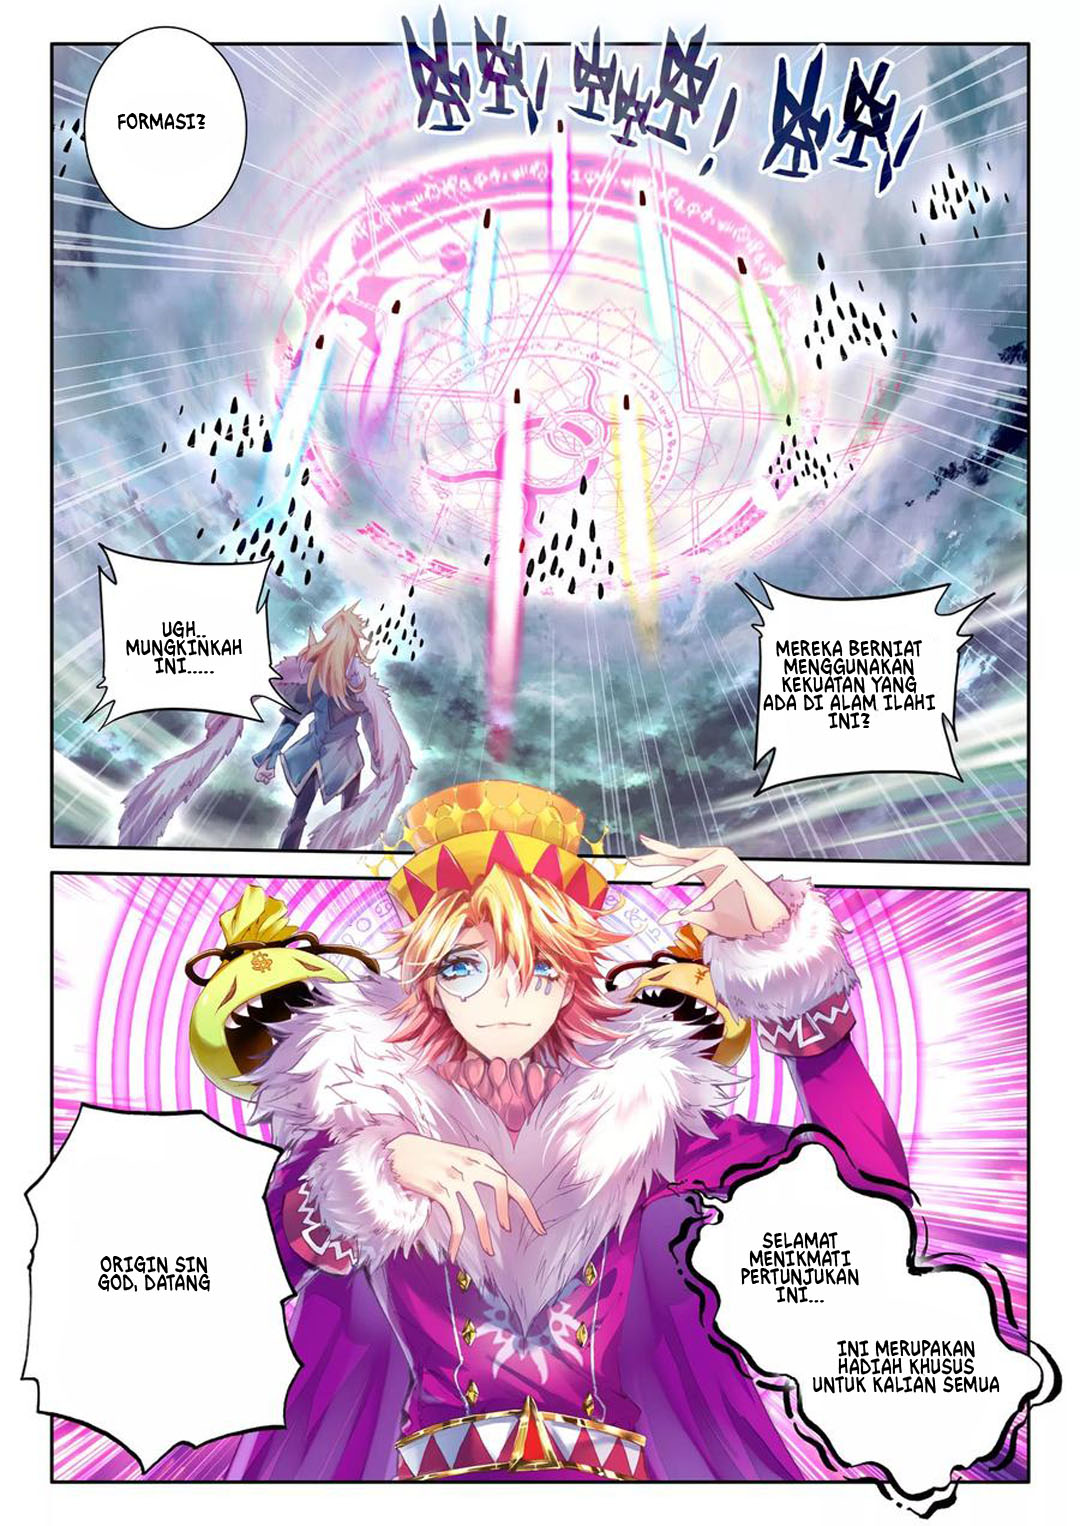 Soul Land – Legend of The Gods’ Realm Chapter 40.1 12